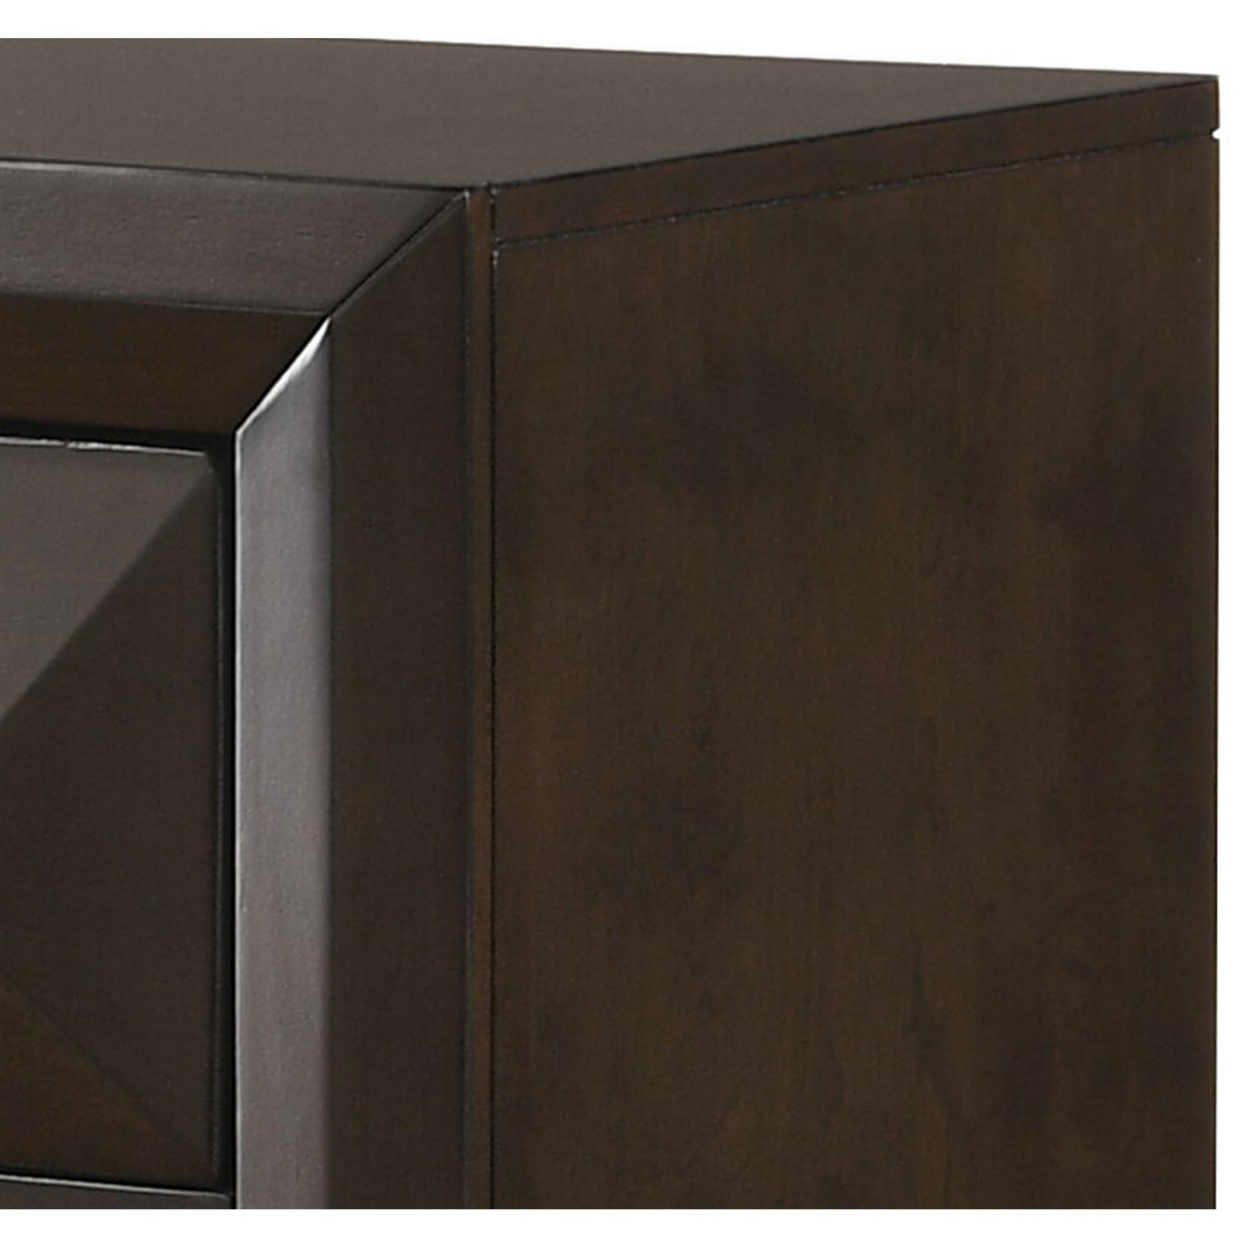 Wooden Nightstand With Dramatic Bevel Drawer Fronts, Espresso Brown- Saltoro Sherpi